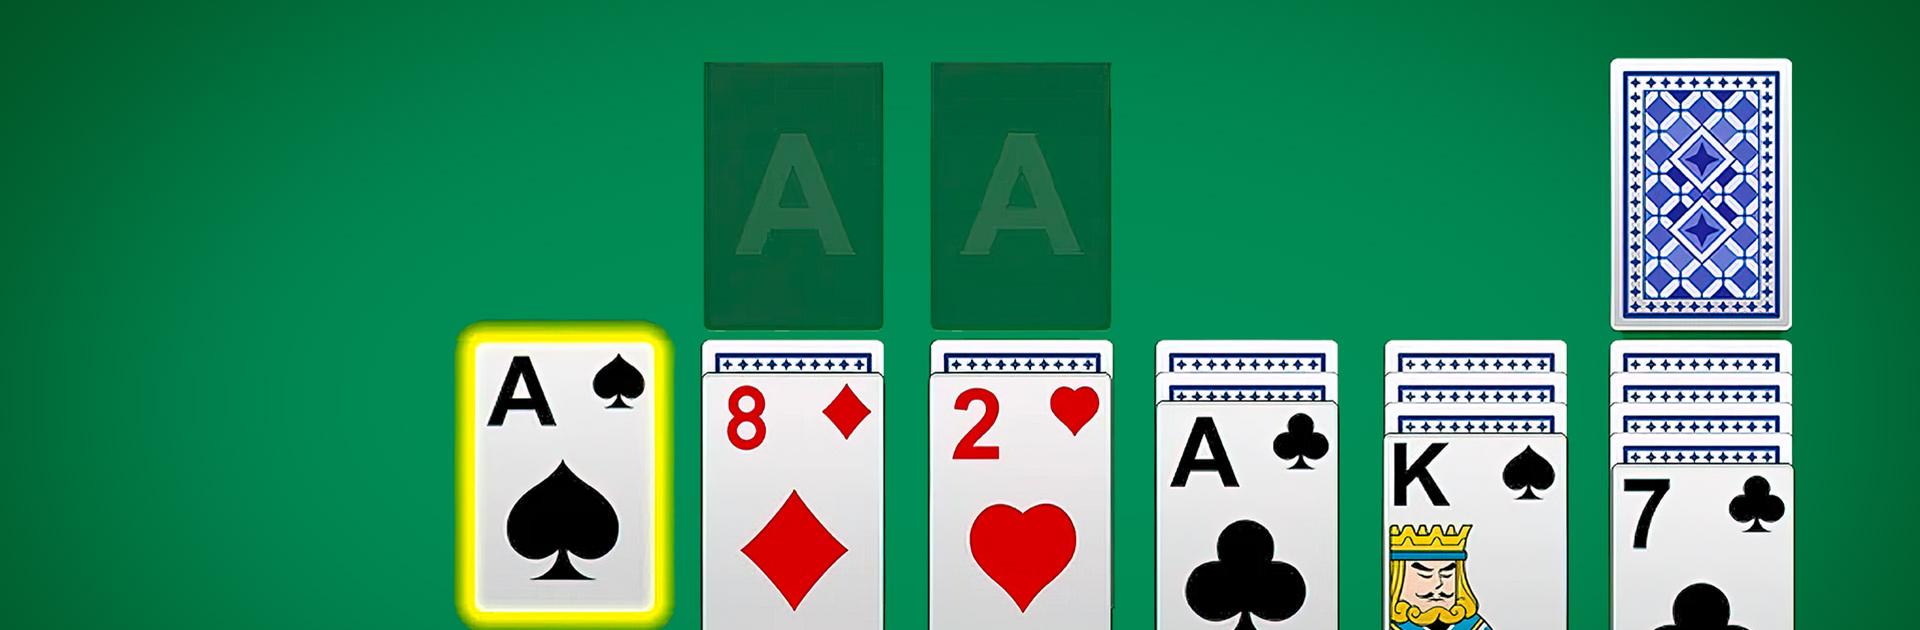 Download & Play Solitaire Jackpot: Win Real Money on PC & Mac (Emulator)